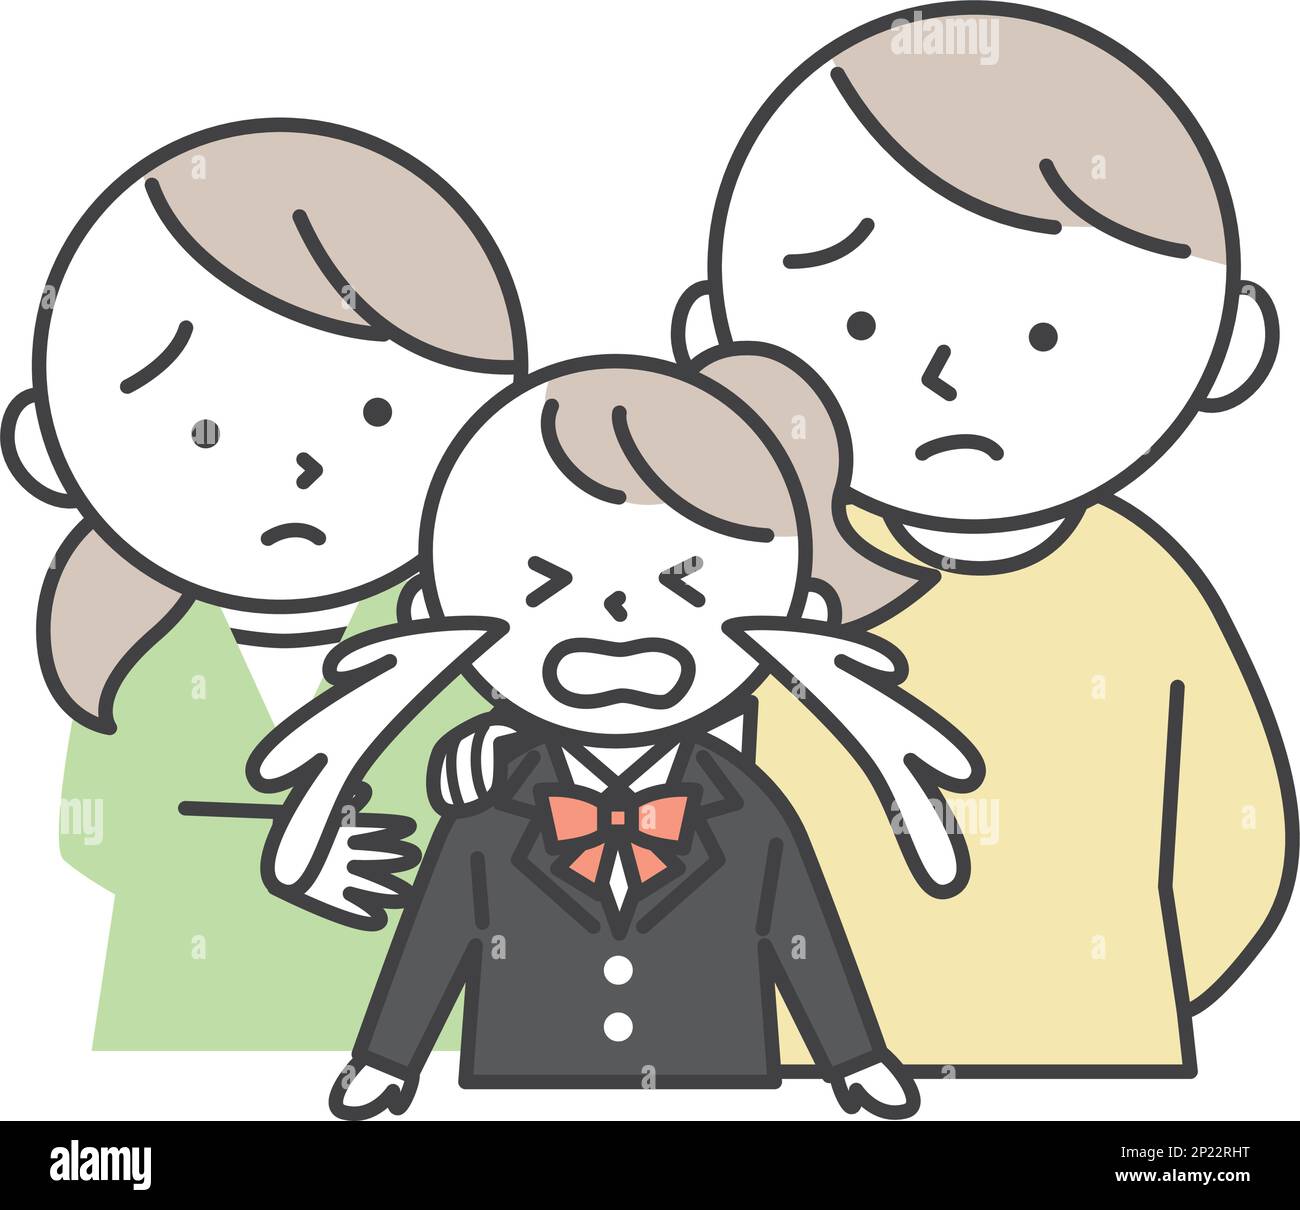 A female student in a blazer uniform crying and her parents worried about her. Family illustration of daughter and parents. Simple style illustrations Stock Vector